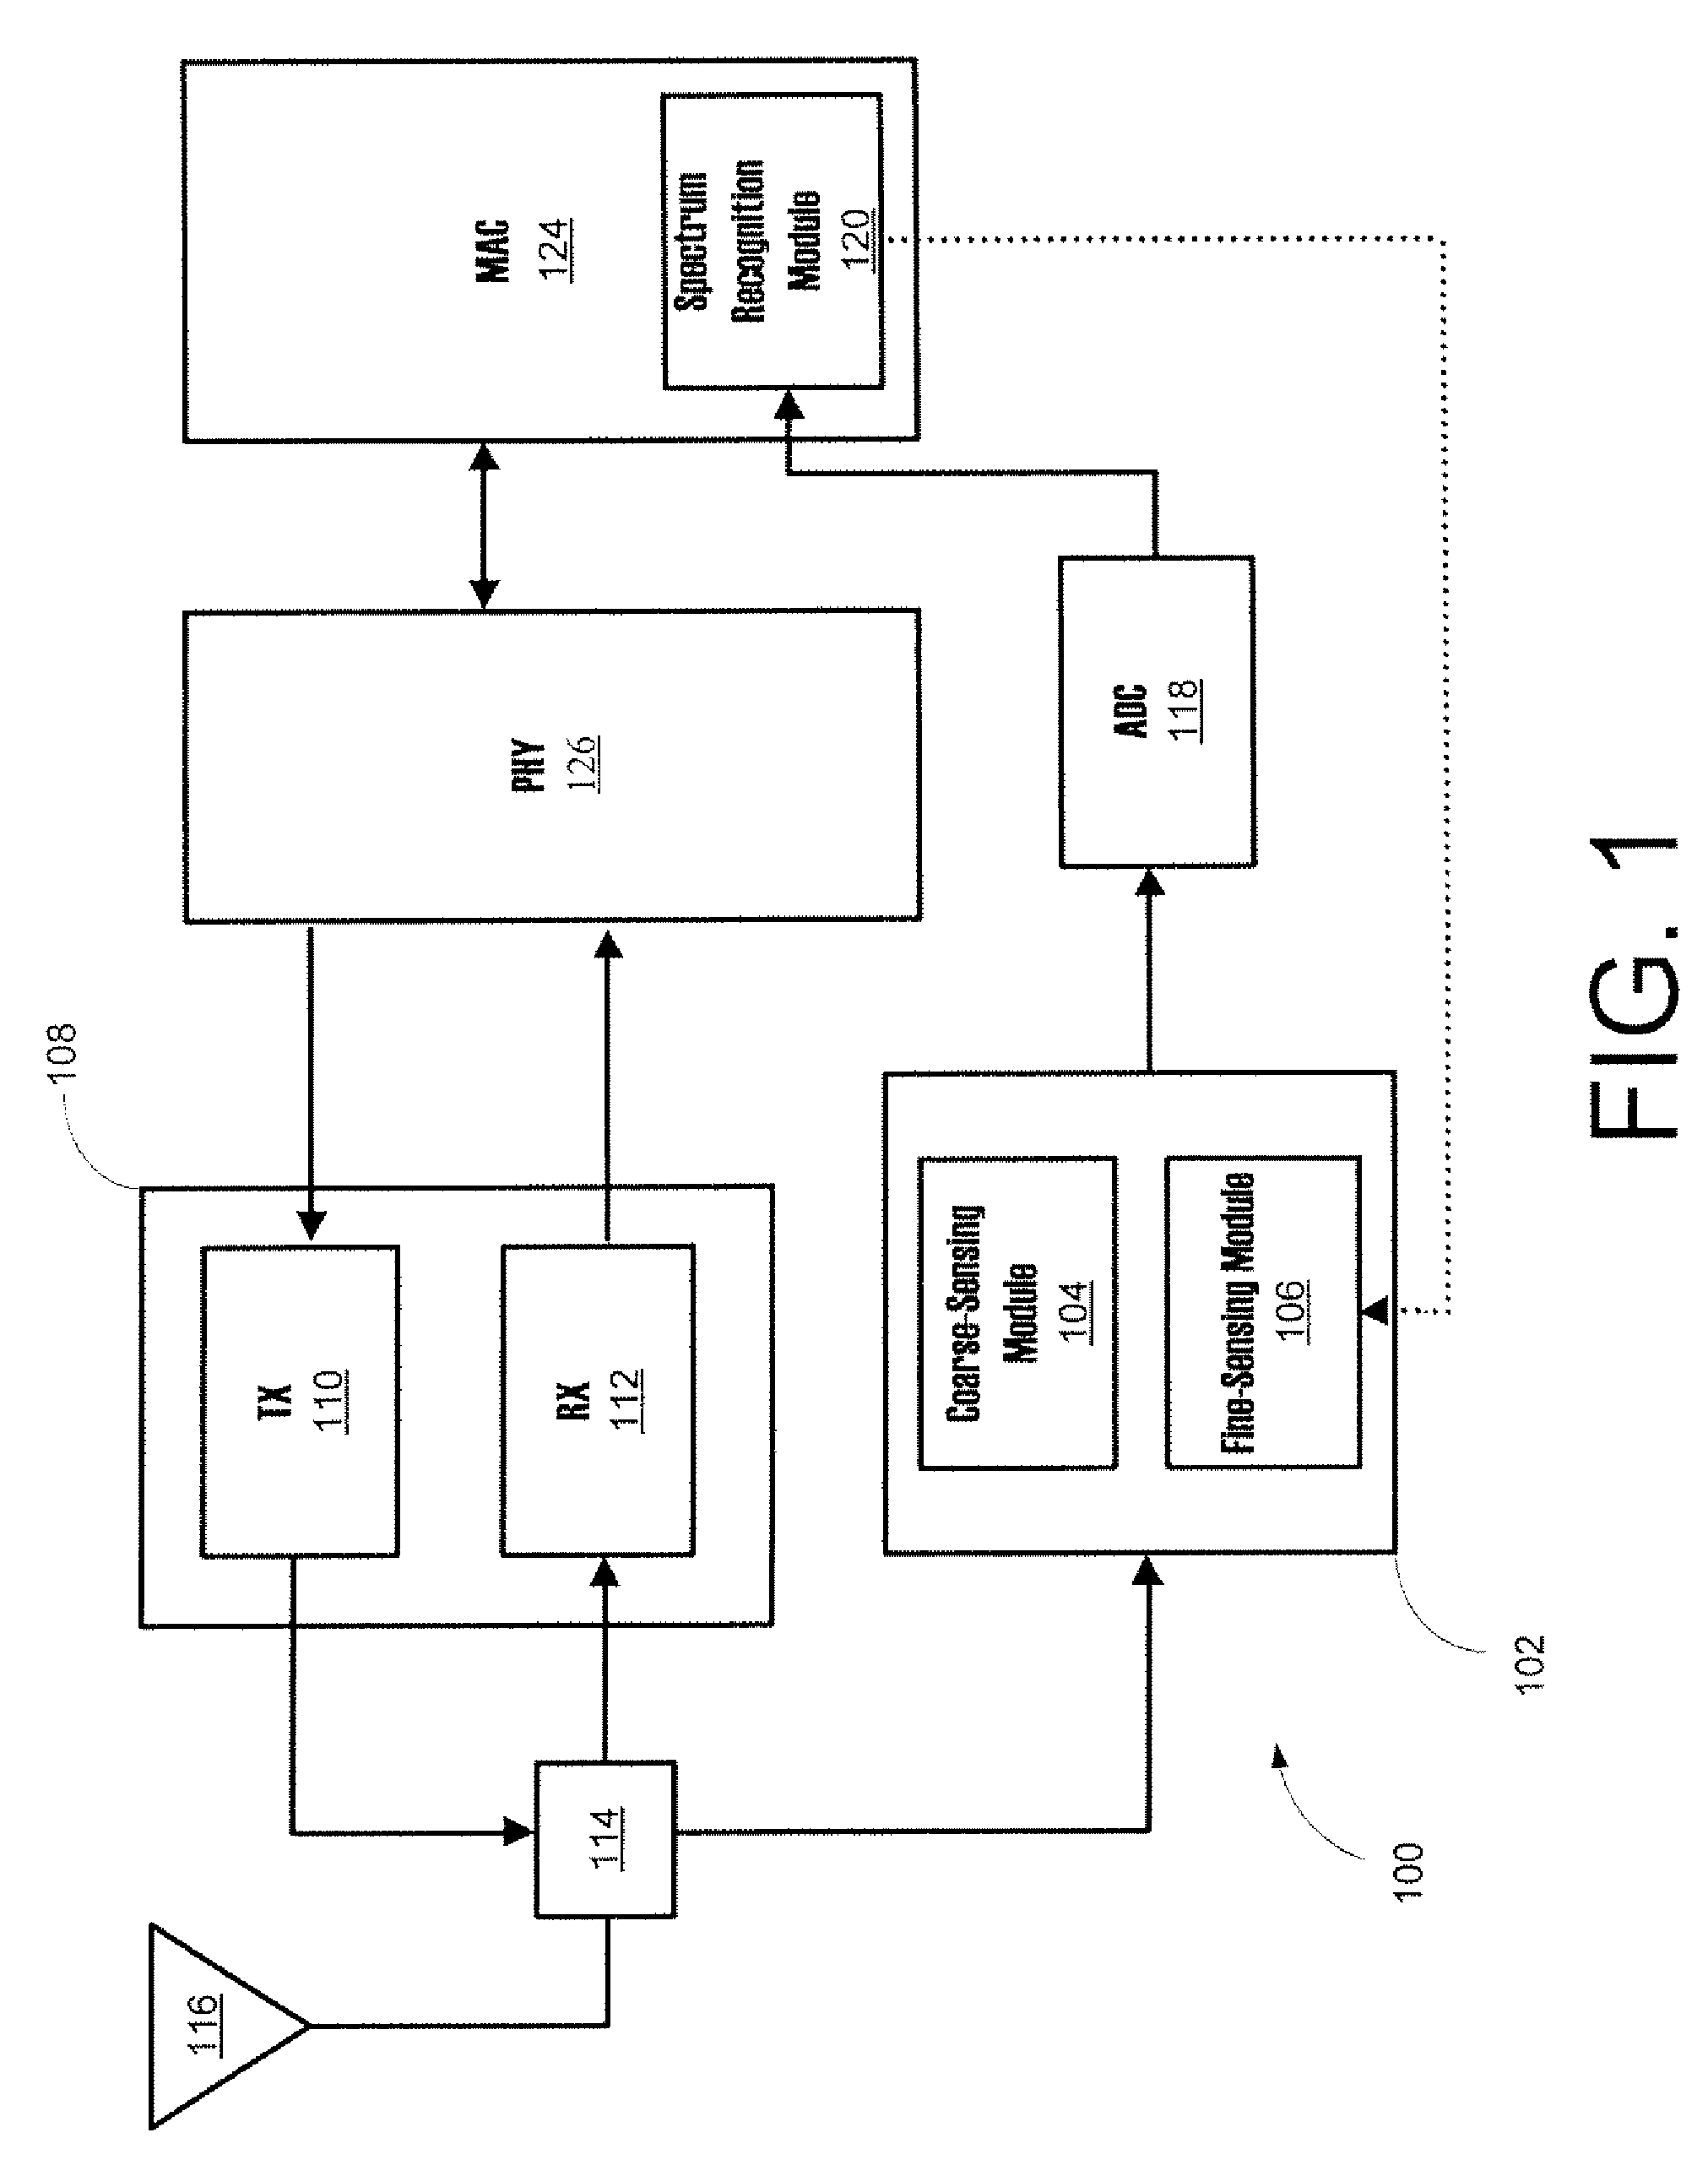 Systems, Methods, and Apparatuses for Spectrum-Sensing Cognitive Radios